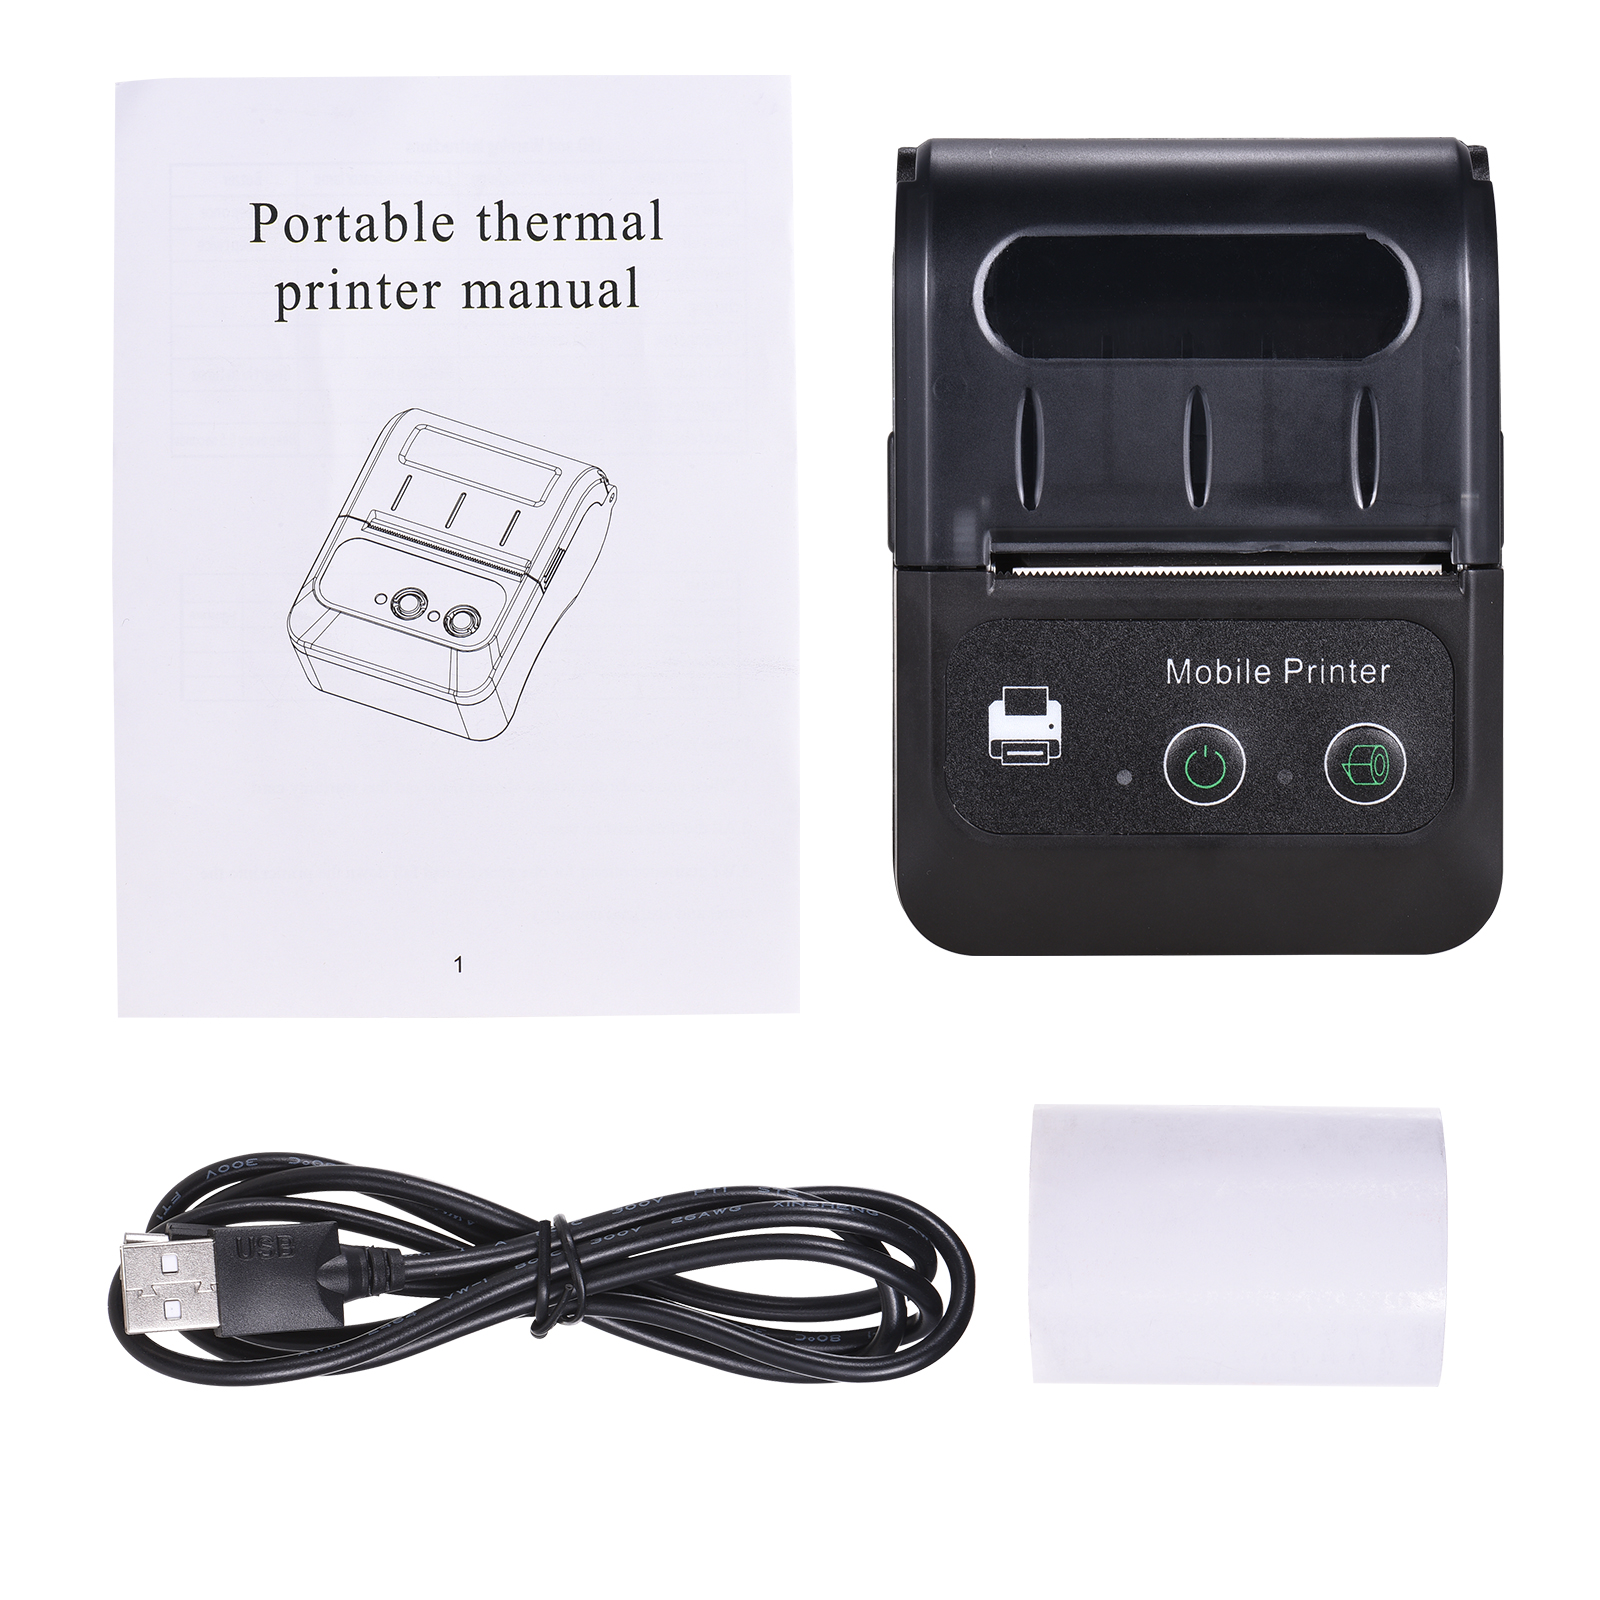 Portable Phone Thermal Receipt Printer 58mm Mini Size To Carry On Works With Android & iOS Handheld Wireless Bluetooth Printer